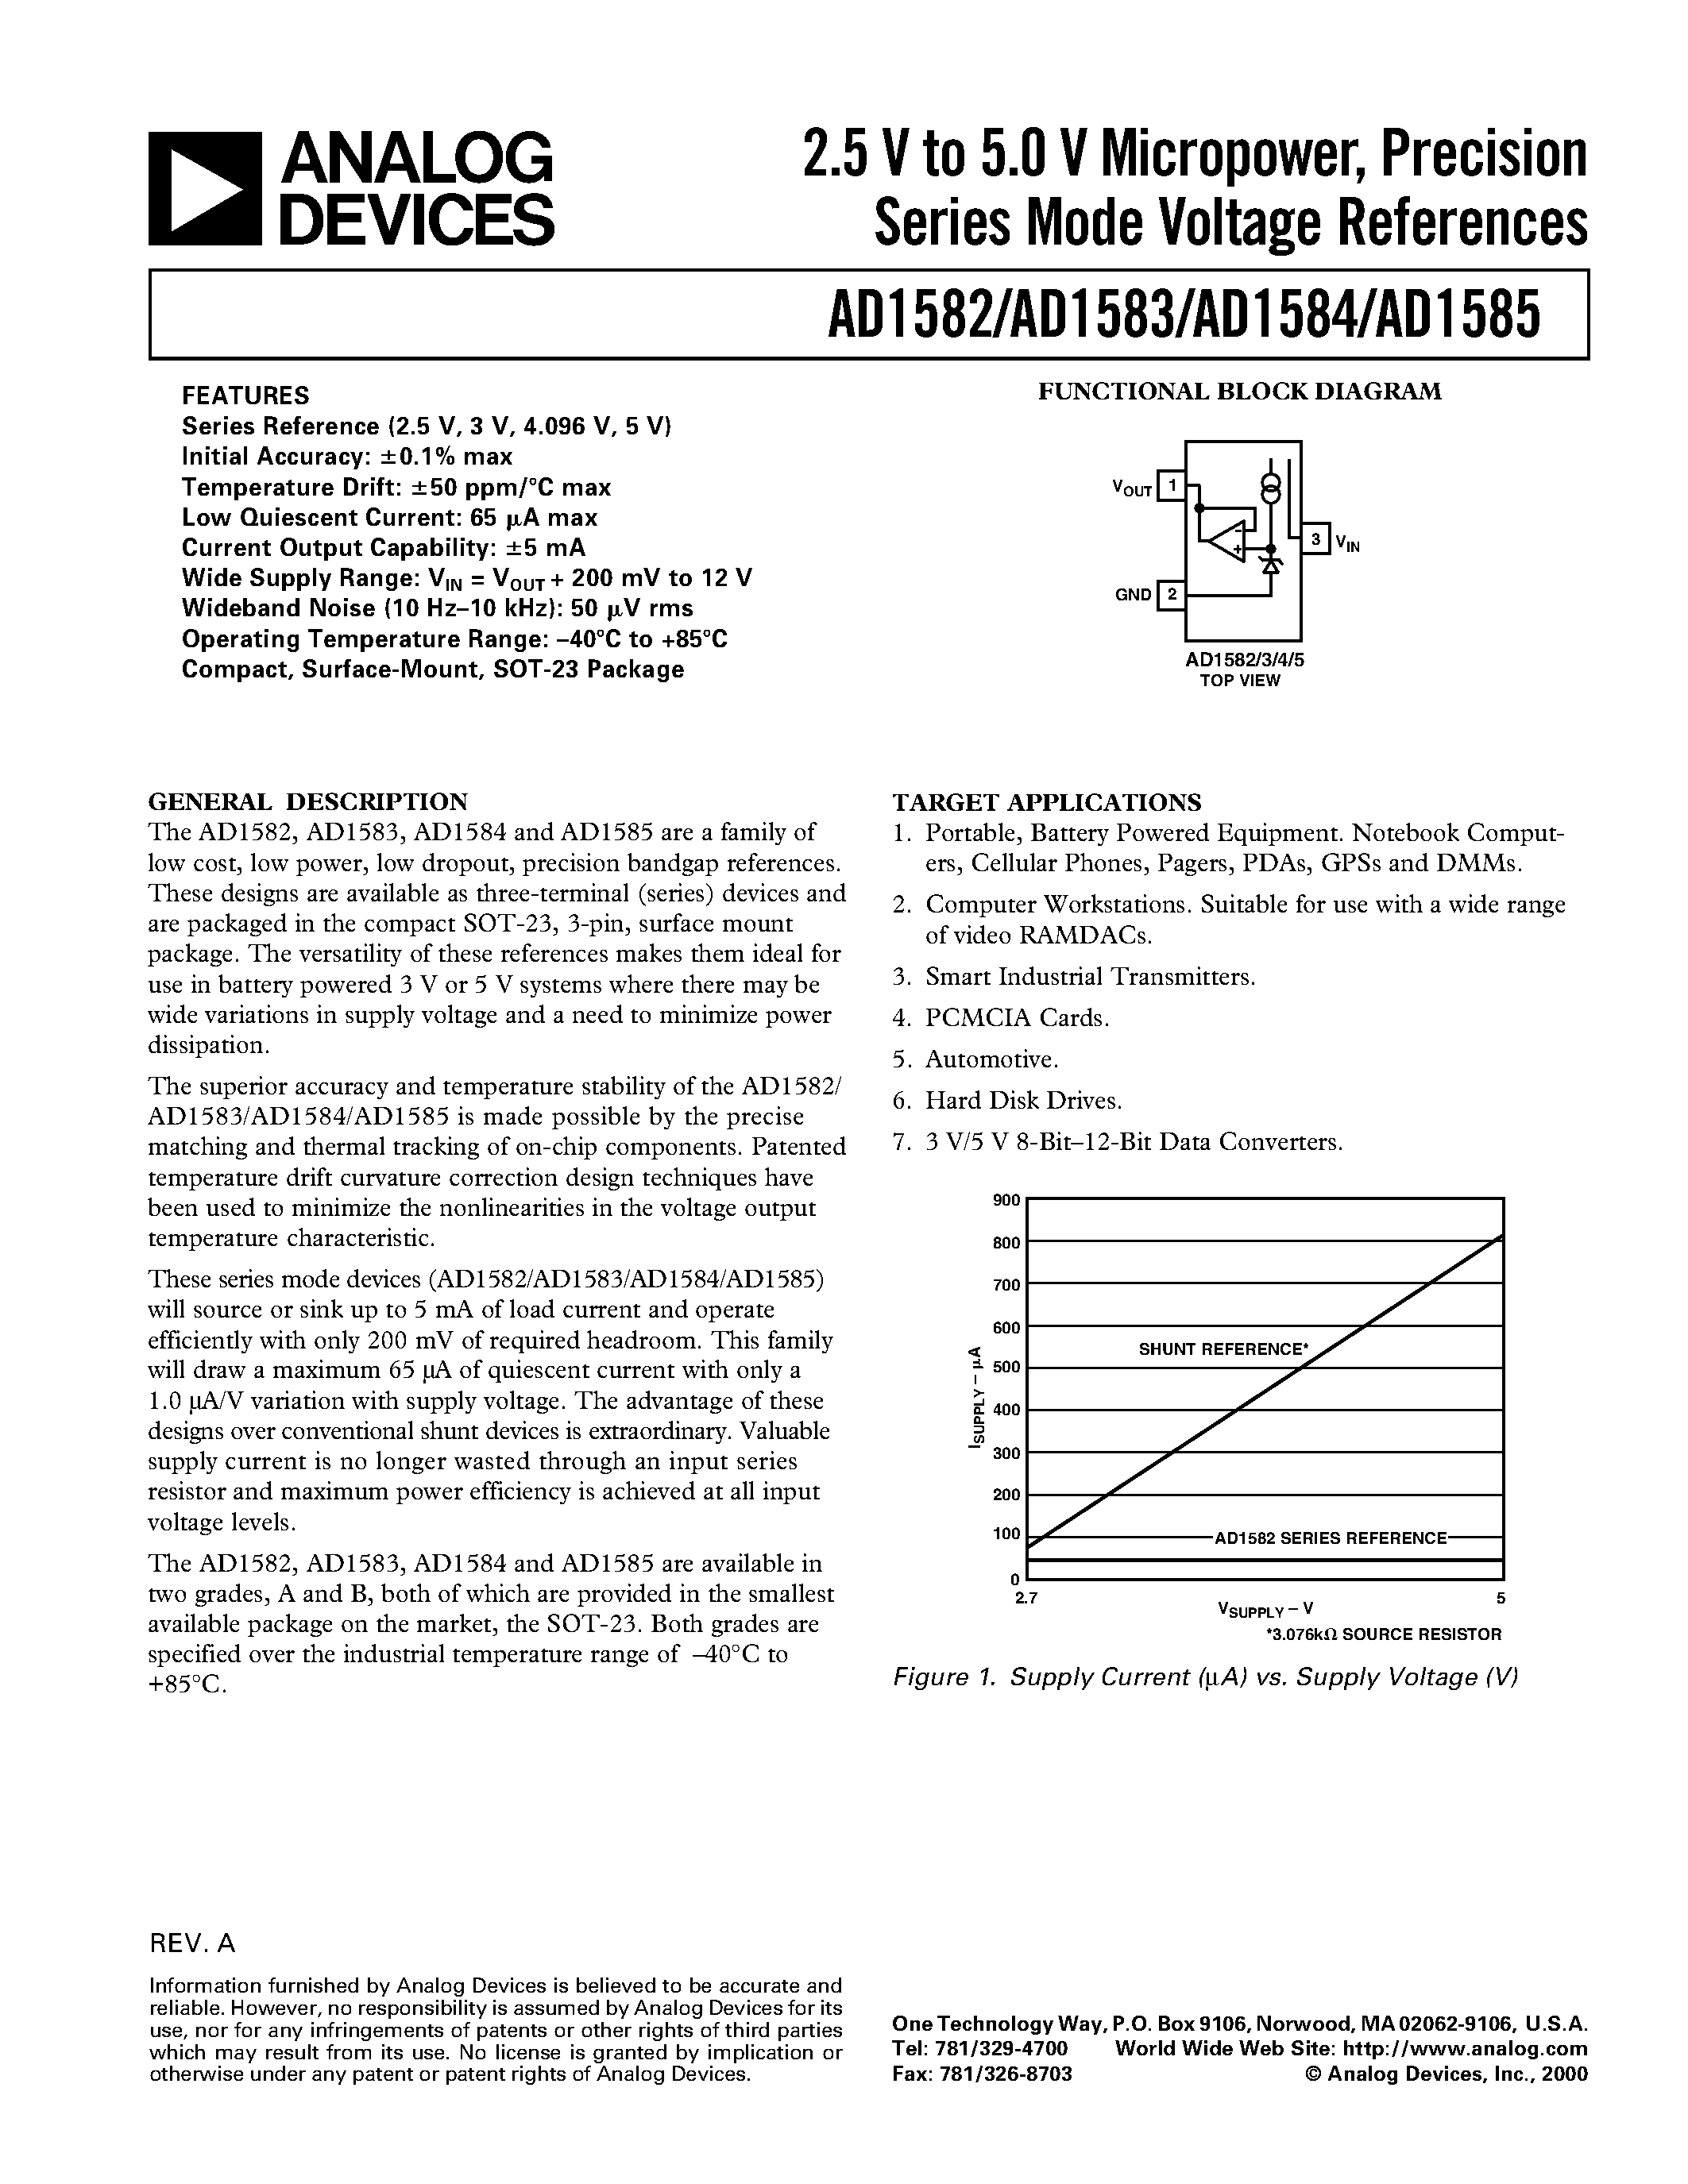 Даташит AD1585A - 2.5 V to 5.0 V Micropower/ Precision Series Mode Voltage References страница 1